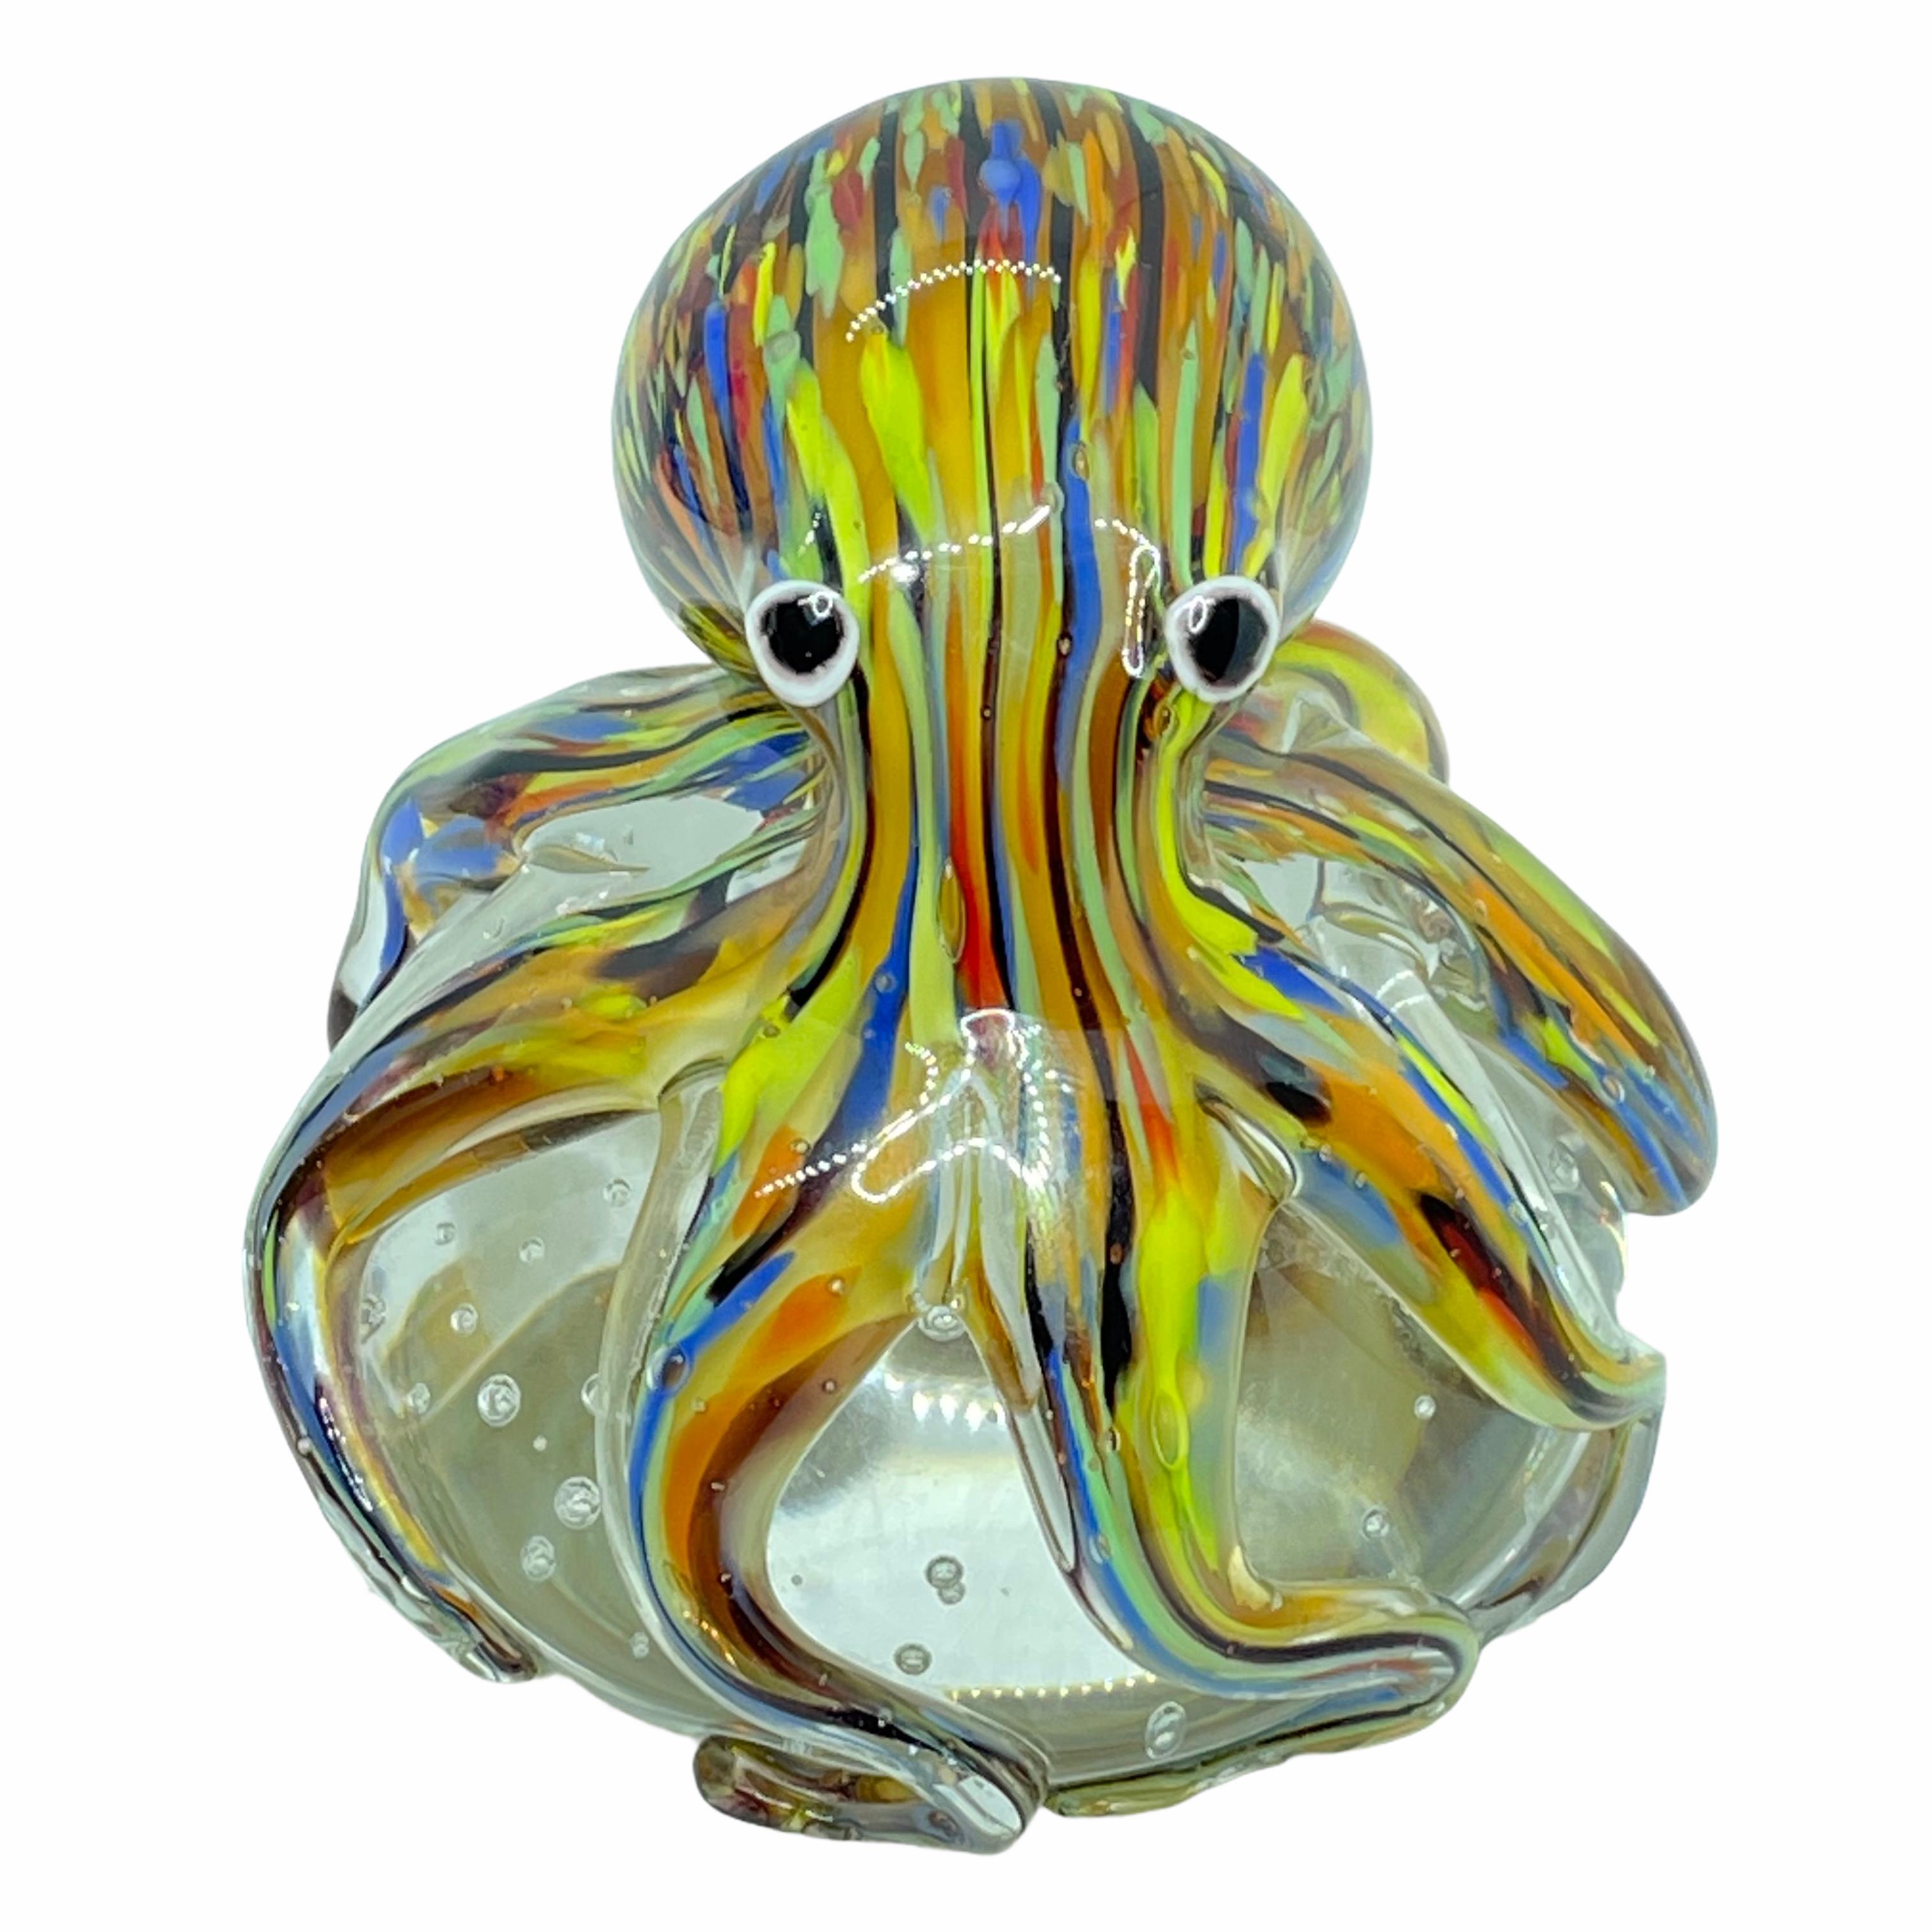 Beautiful Murano hand blown aquarium Italian art glass paper weight. Showing a giant octopuses, on a glass bubble floating on controlled bubbles. Colors are a blue, yellow, orange and clear. A beautiful nice addition to your desktop or as a